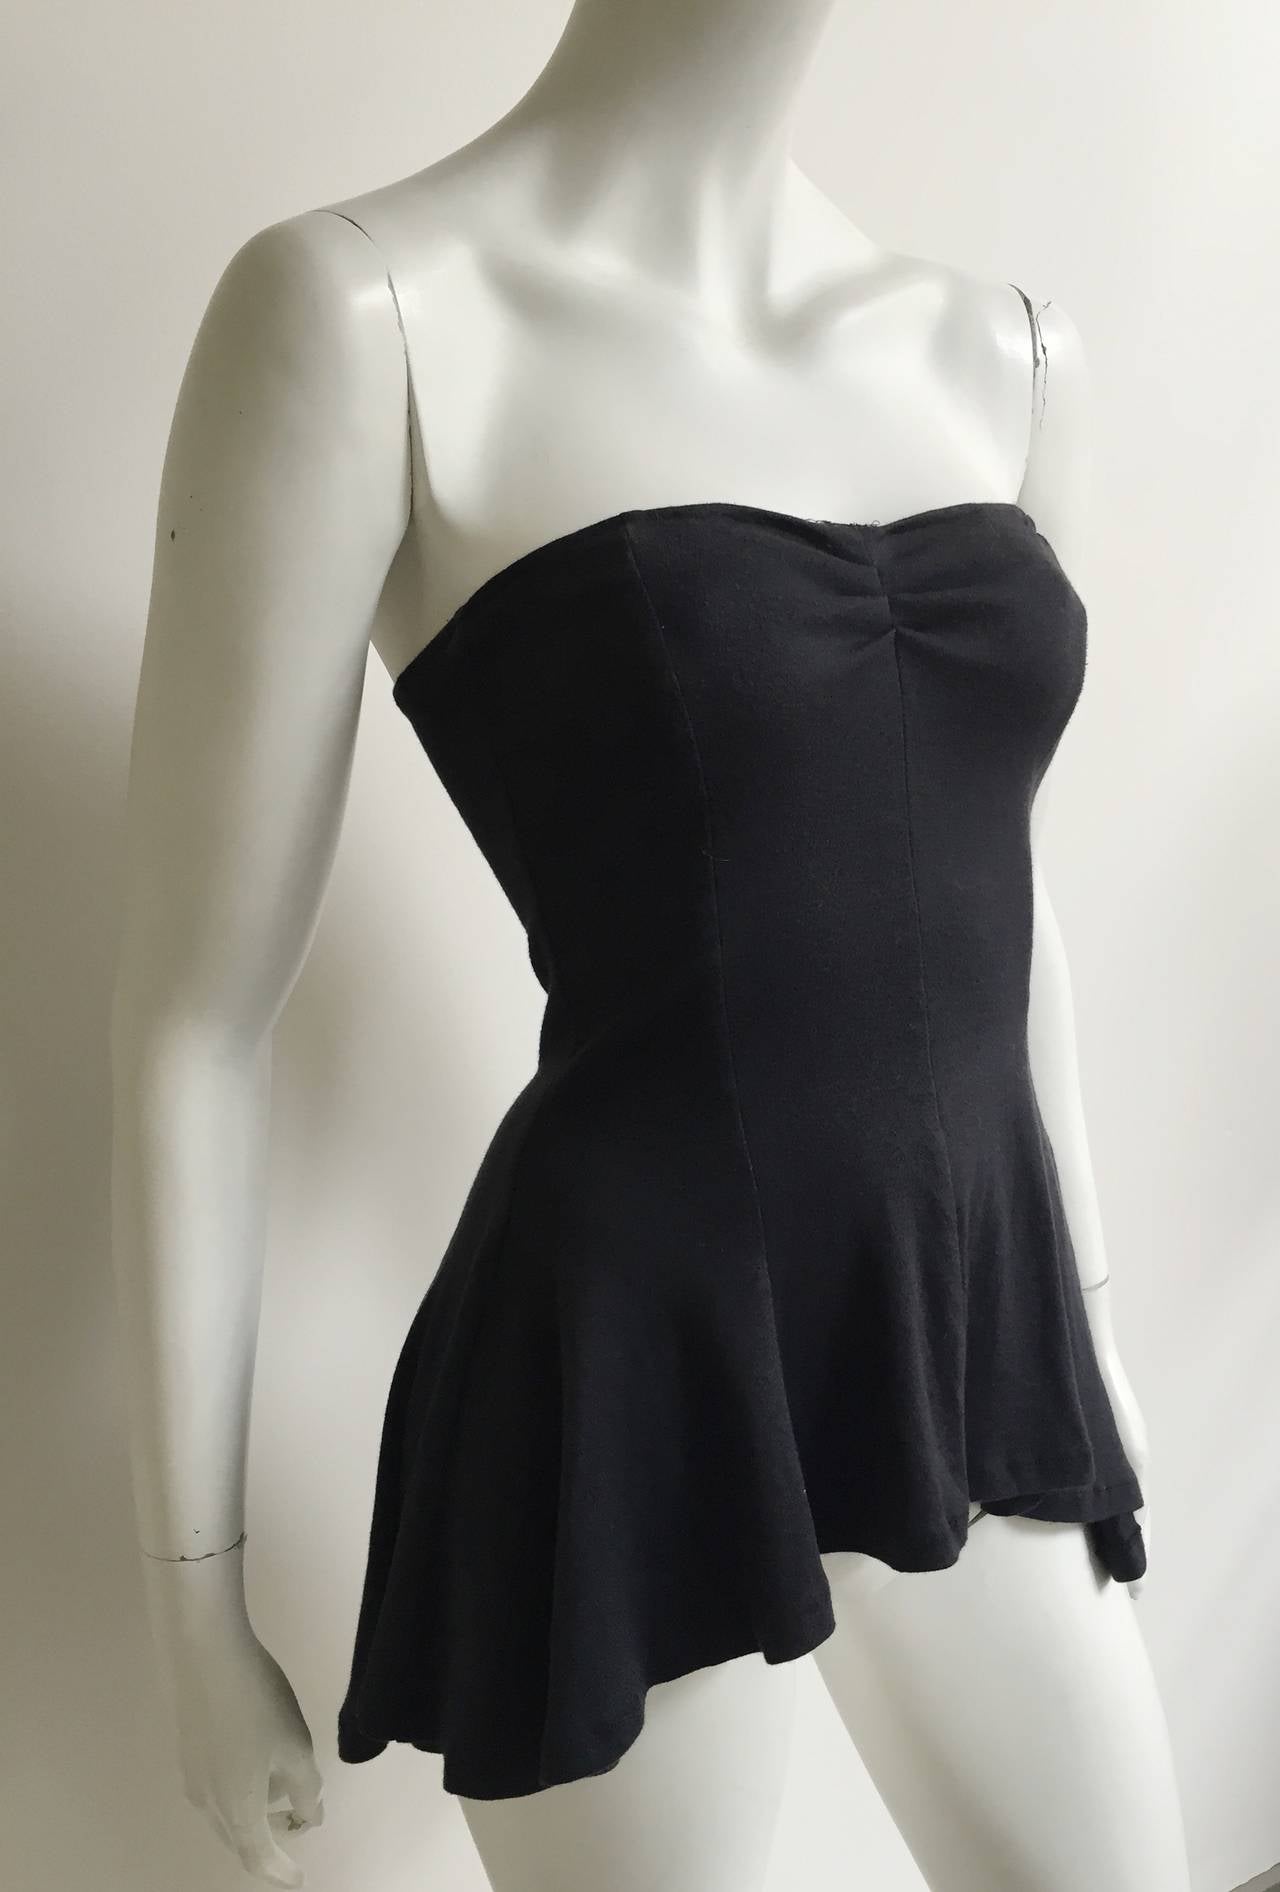 Norma Kamali Black Cotton Strapless Top Size Small. For Sale 4